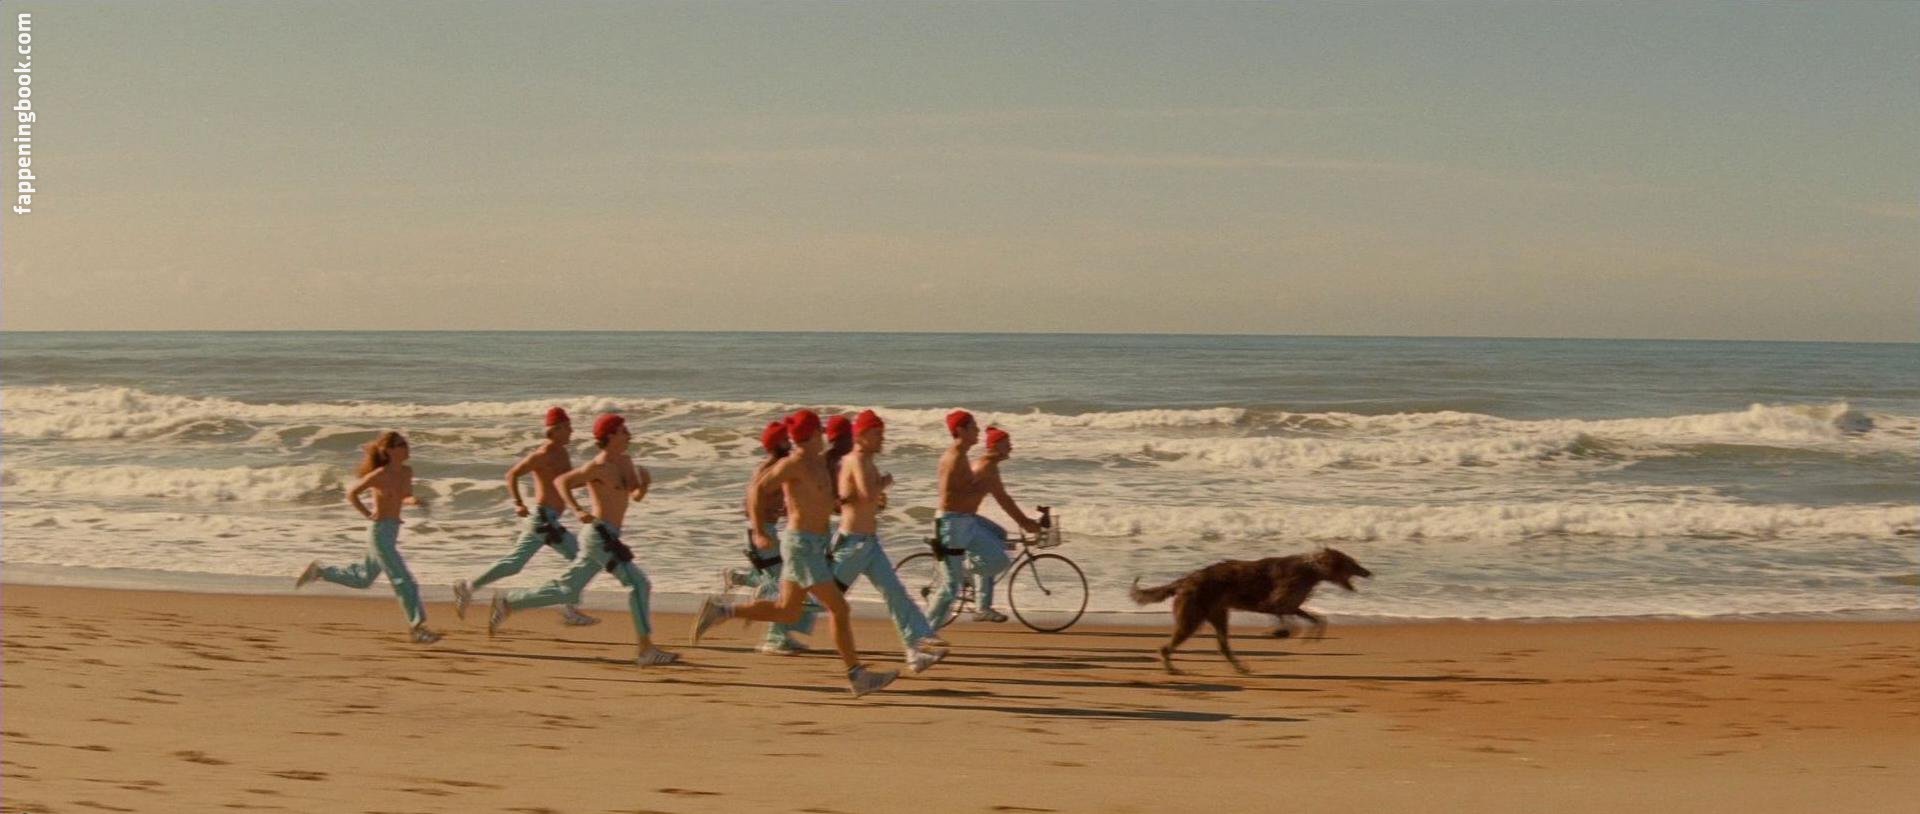 Nude Roles in Movies: The Life Aquatic with Steve Zissou (2004) .